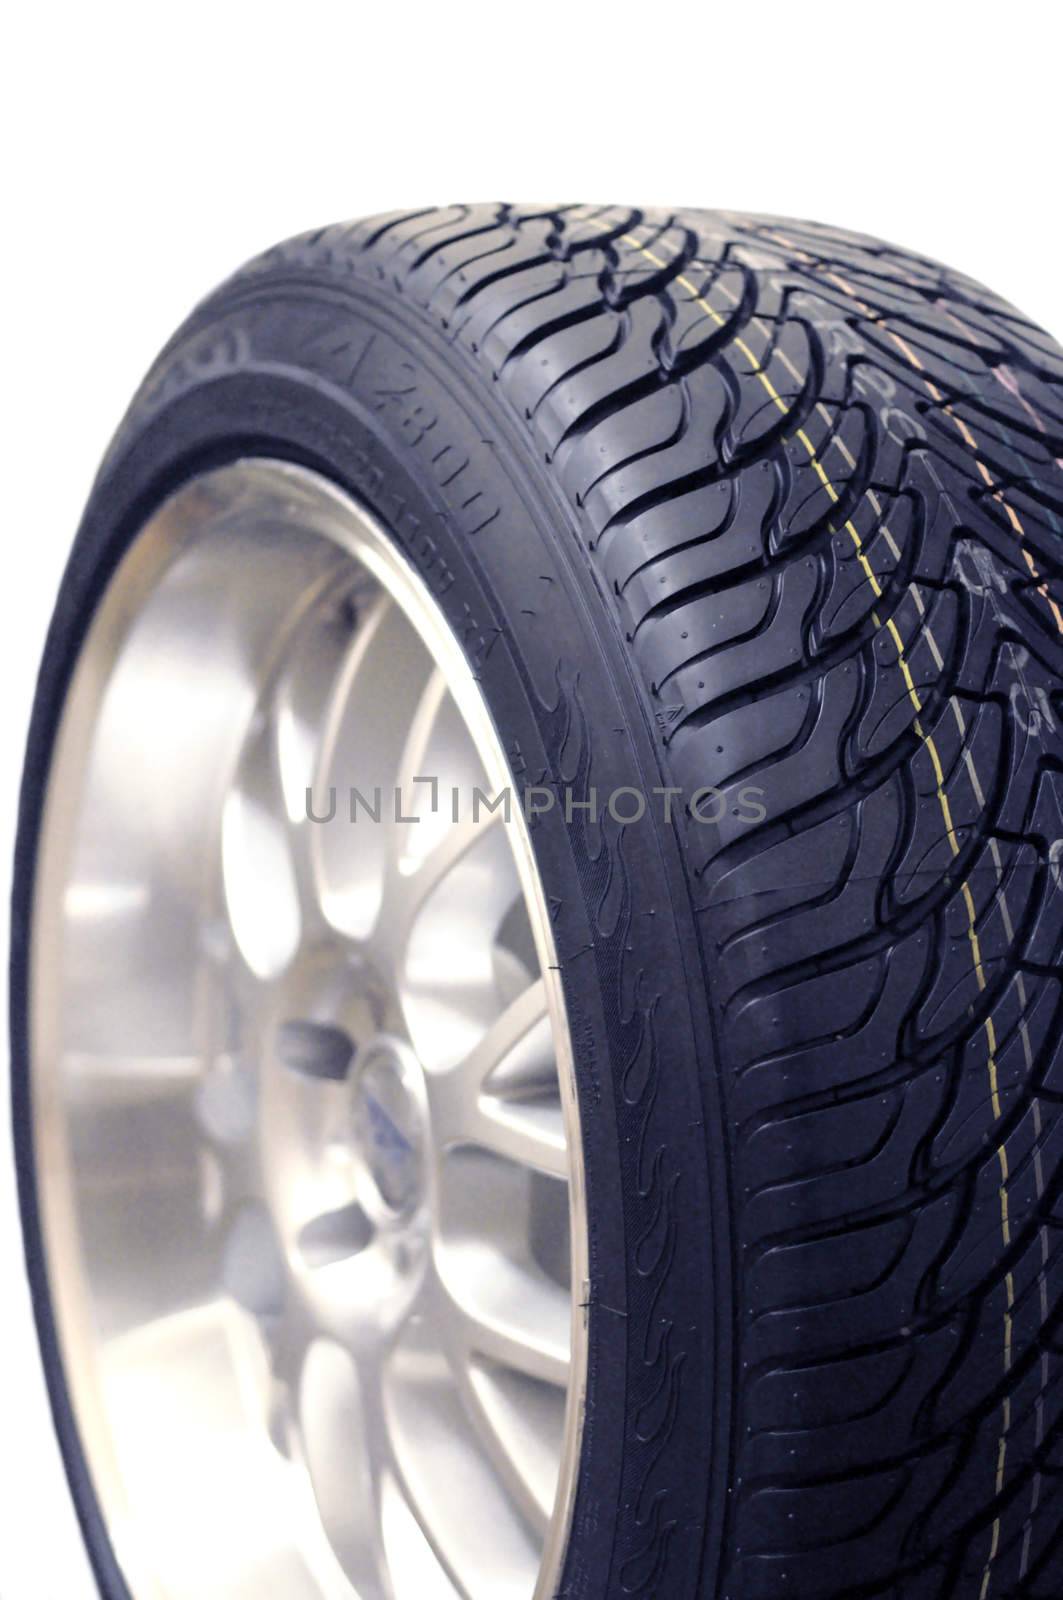 Low-profile car wheel on a white background close